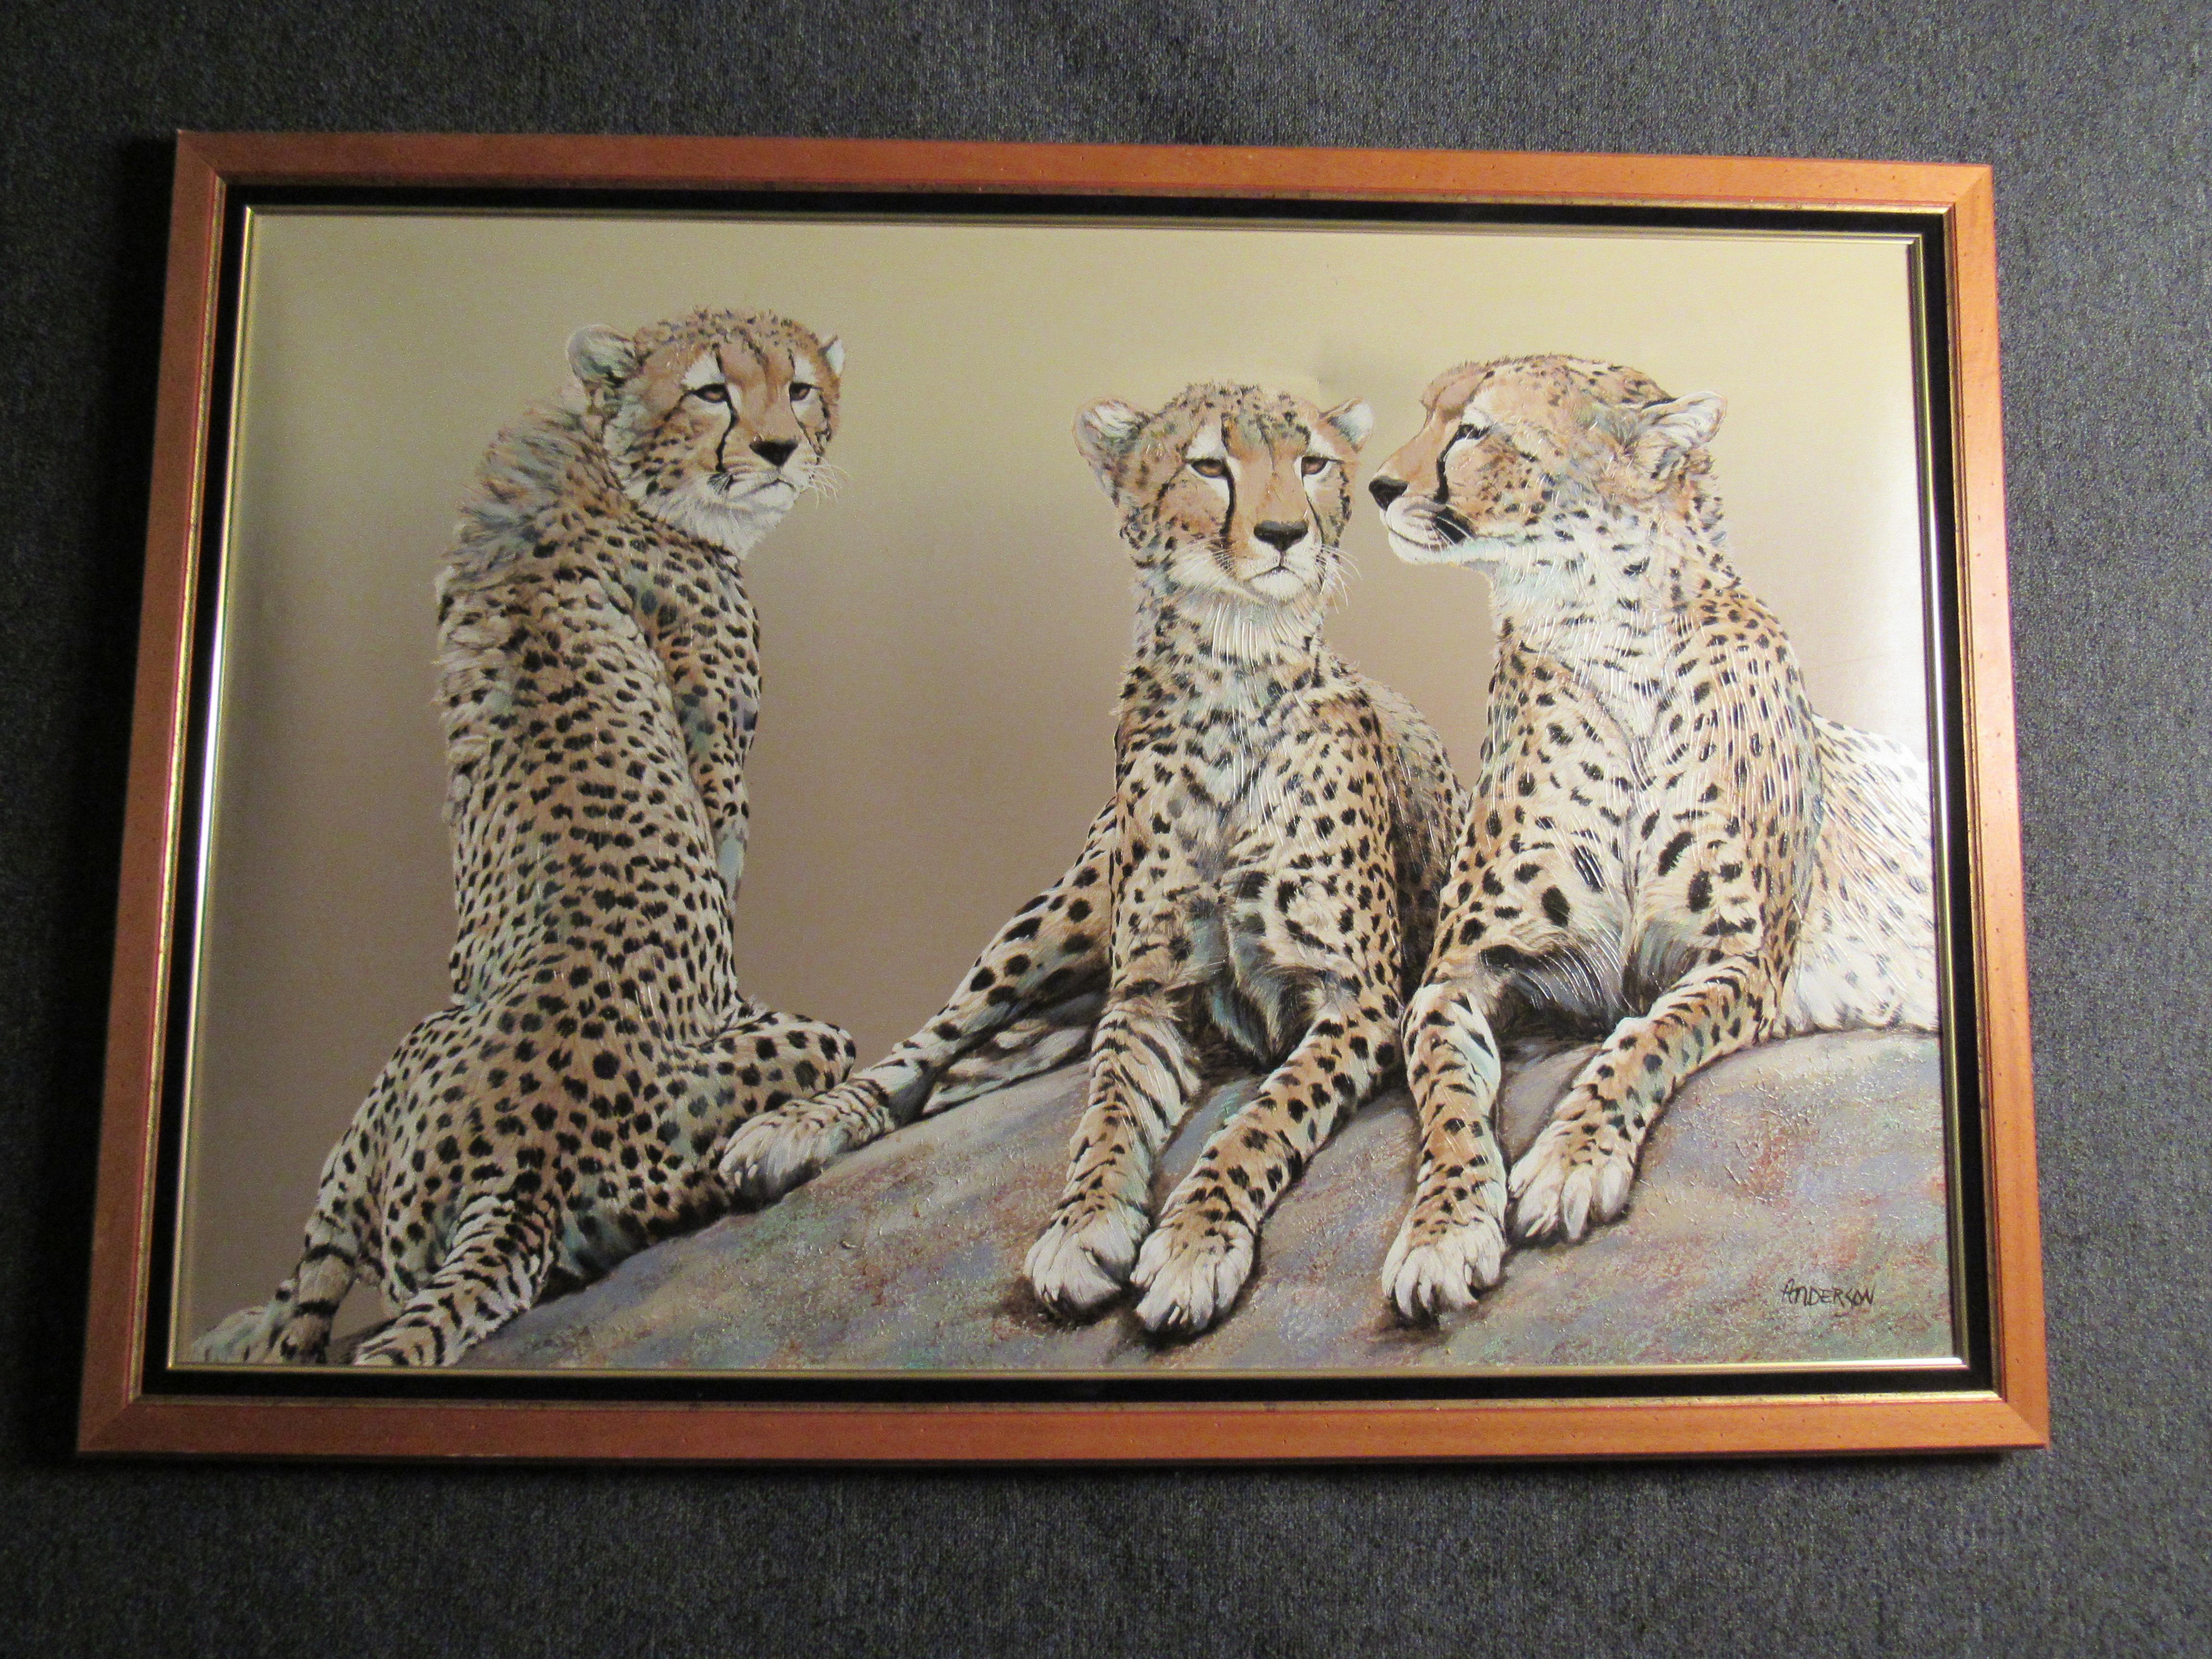 Fabric Massive Cheetah Coalition Oil Painting by Anderson For Sale